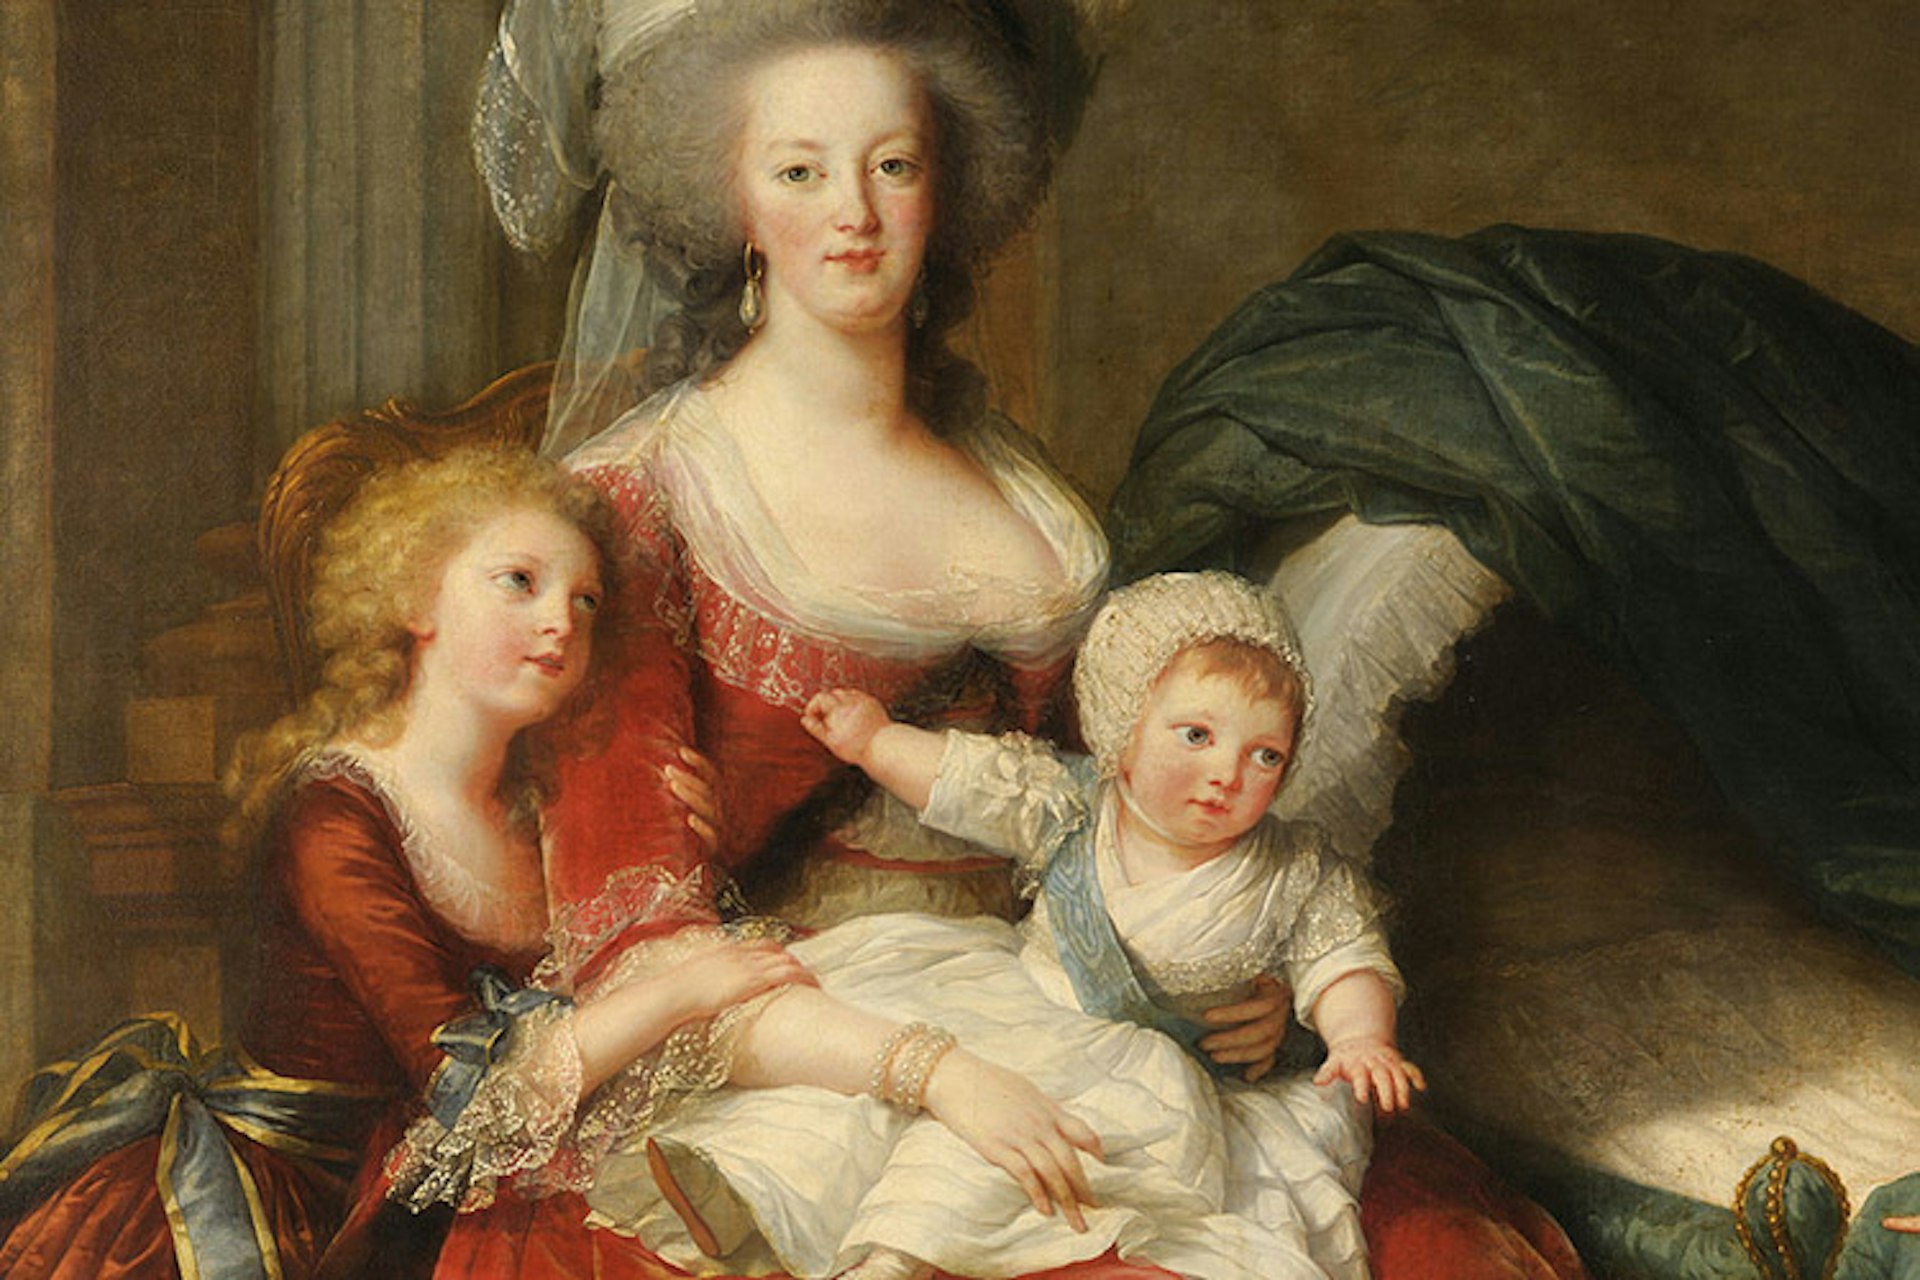 Vigée-Le Brun's portrait of Marie Antoinette shows the controversial queen in a sympathetic light. Image from Wikimedia Commons